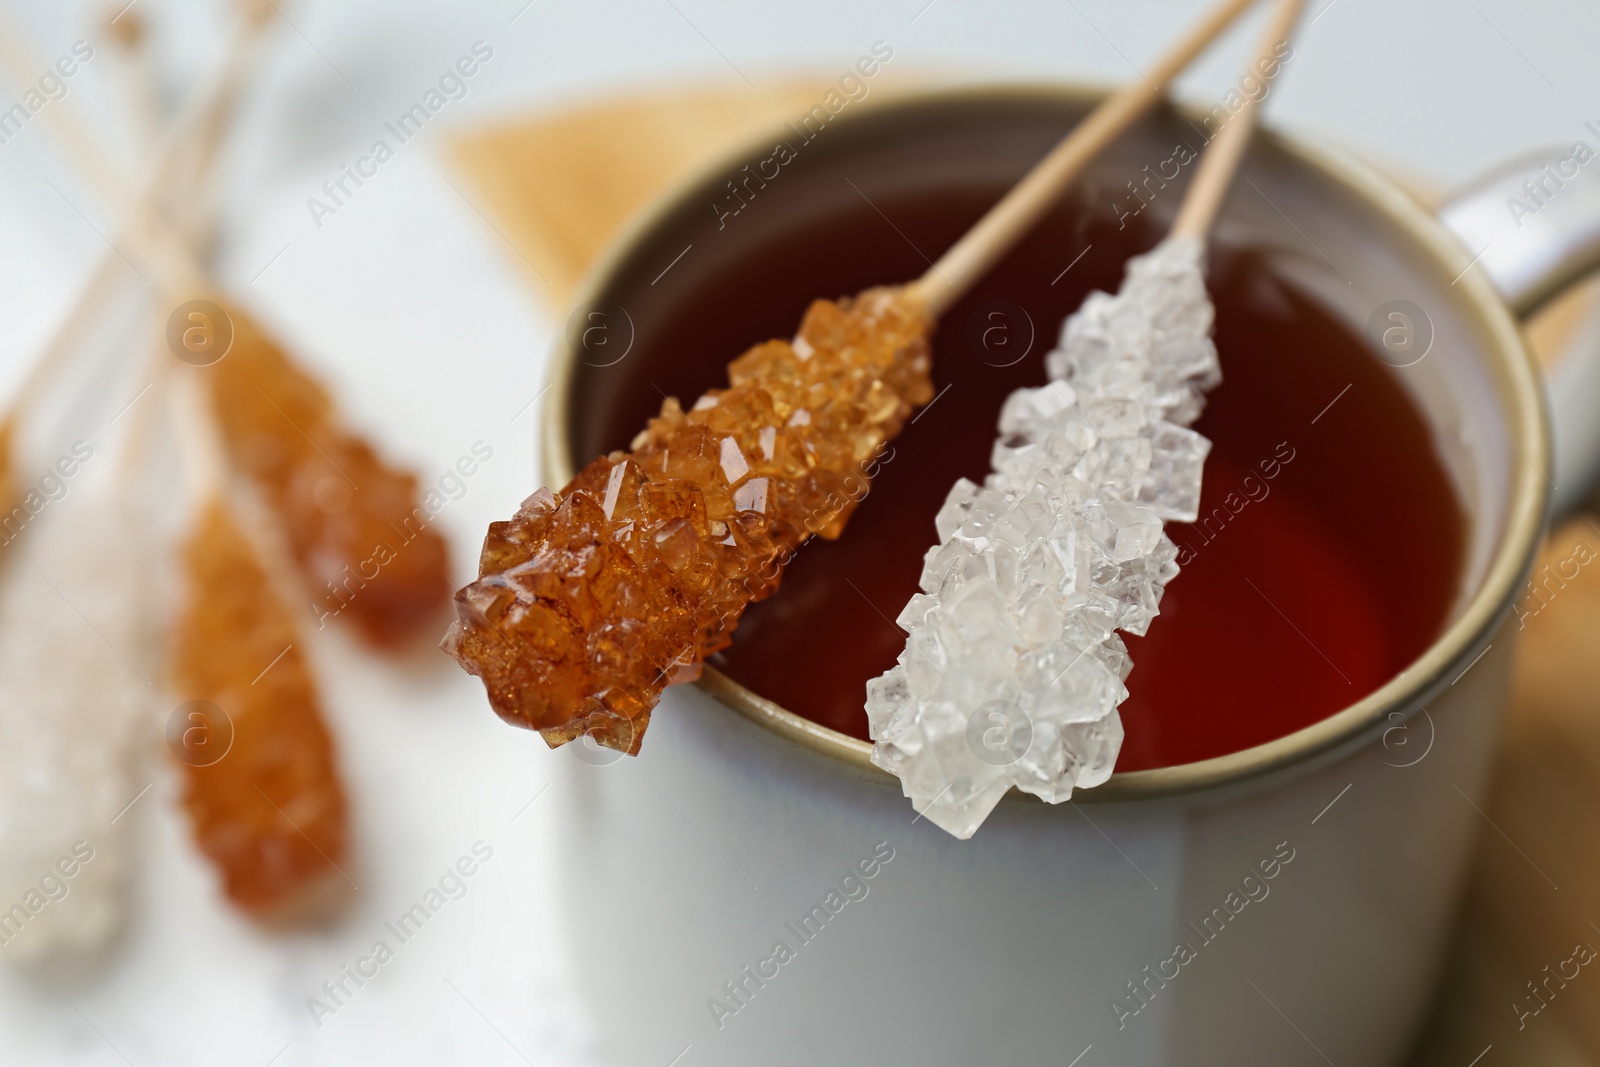 Photo of Sticks with sugar crystals and cup of tea on table, closeup